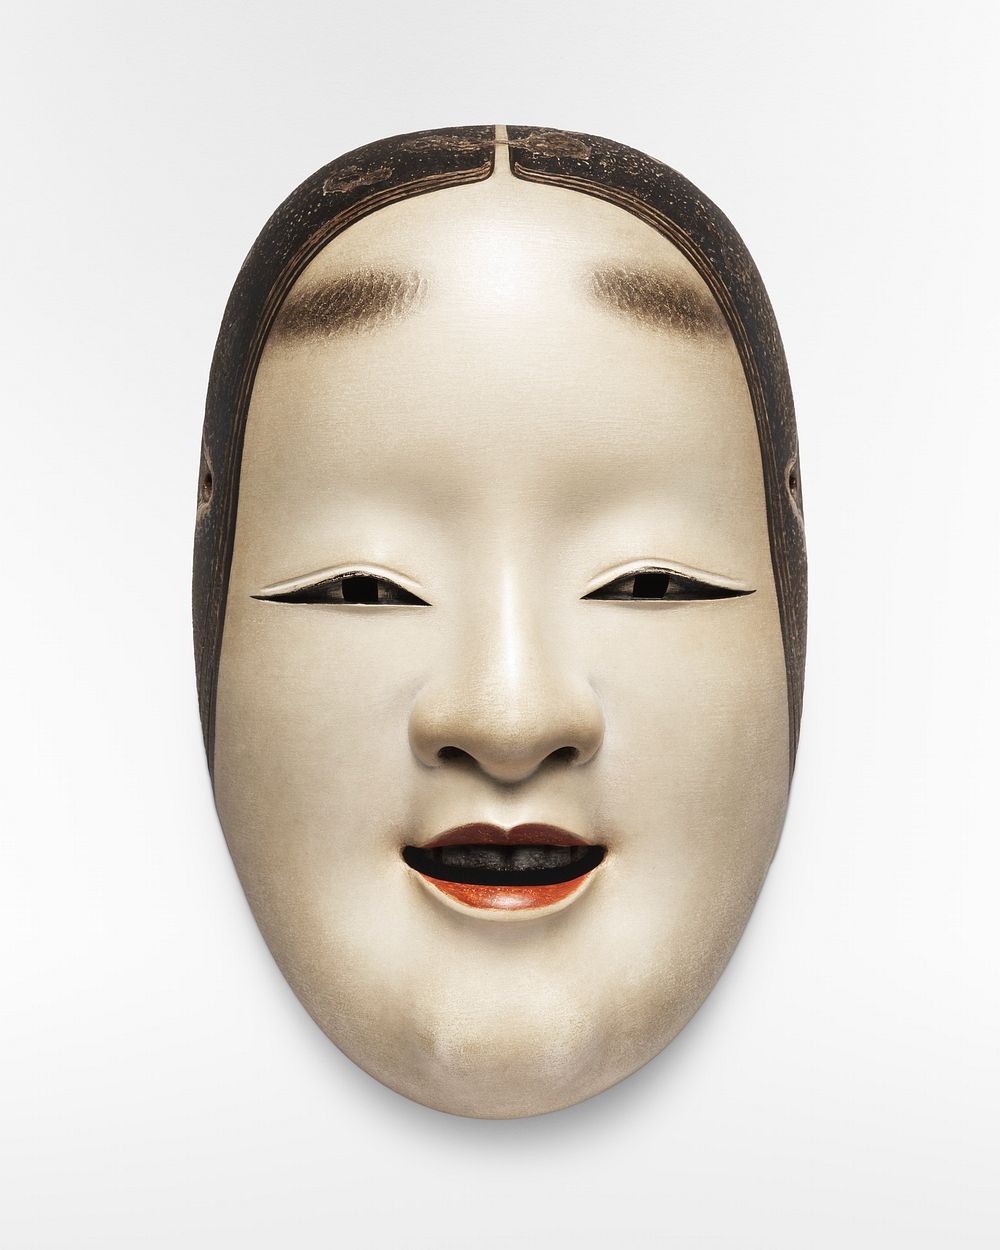 Noh mask of a woman (18th-19th century). Original public domain image from The Minneapolis Institute of Art. Digitally…